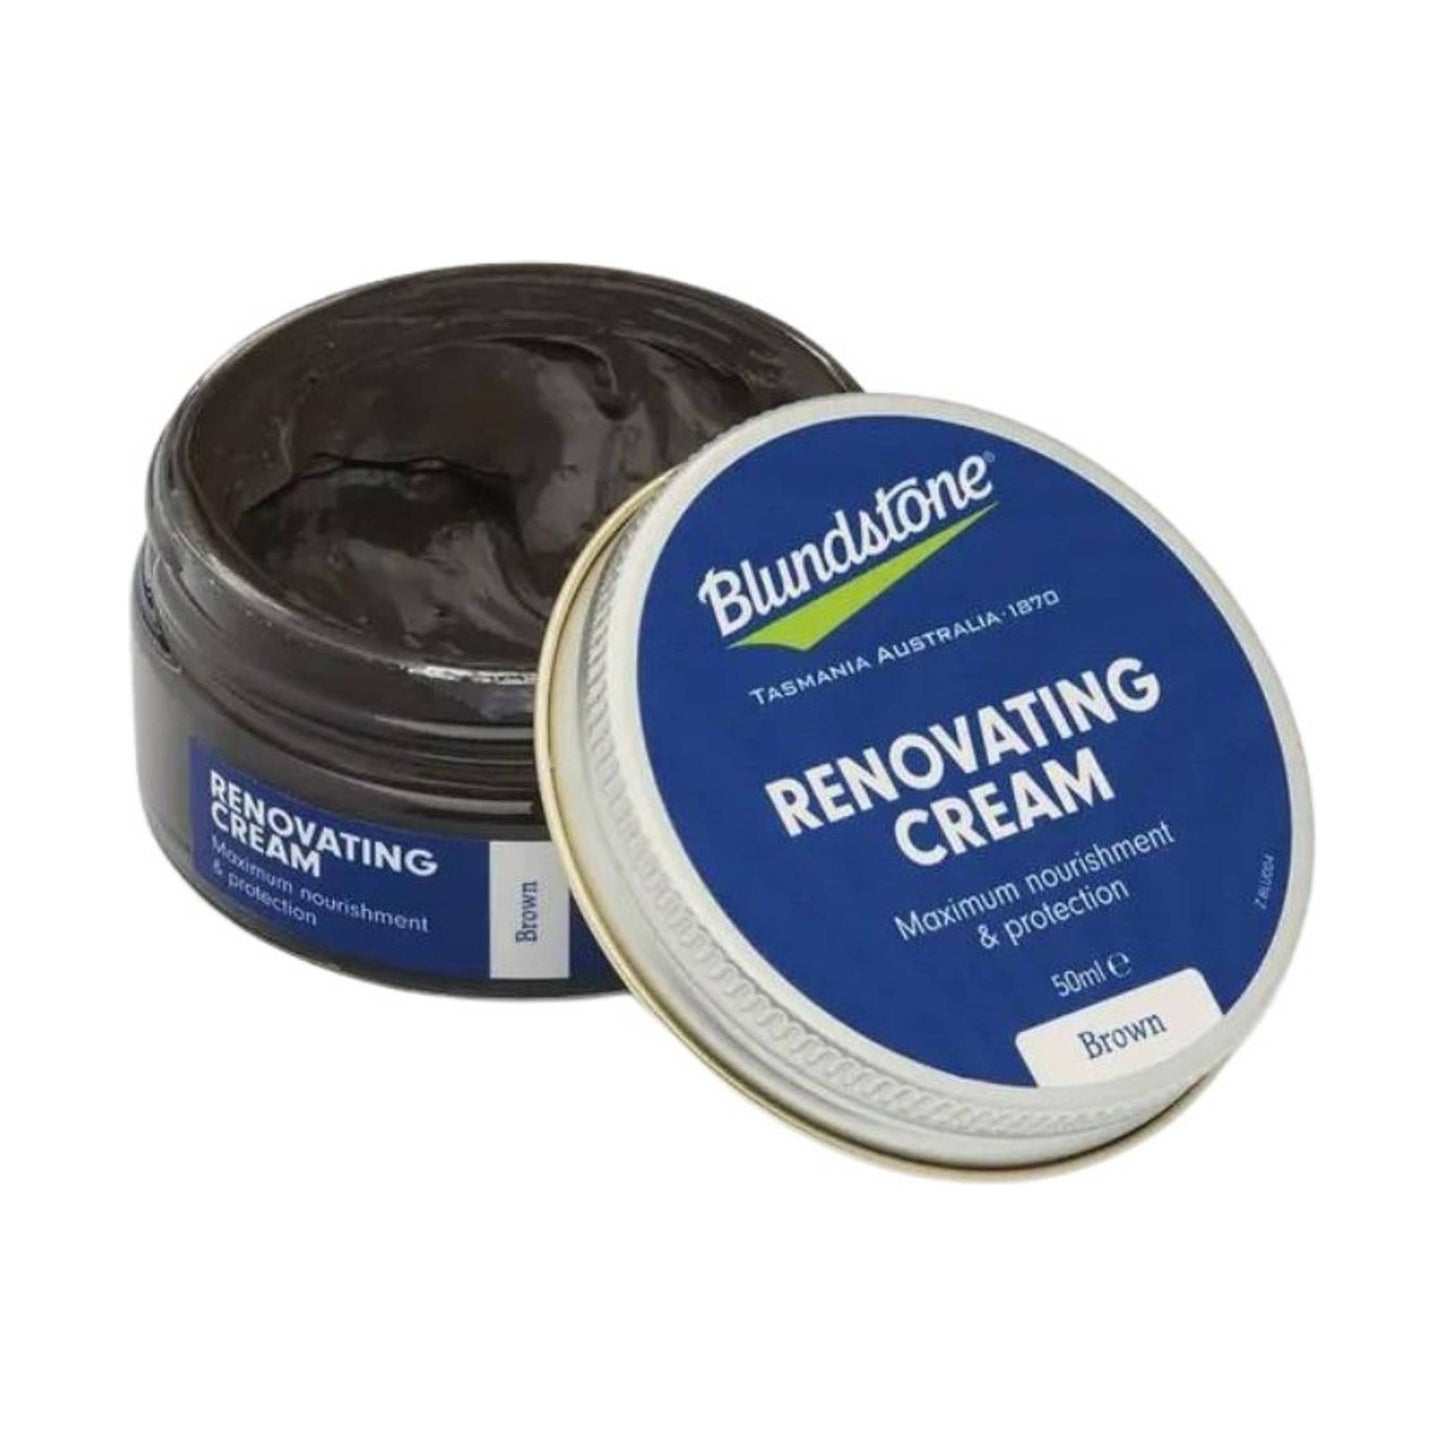 Blundstone Renovating Cream - Brown Leather